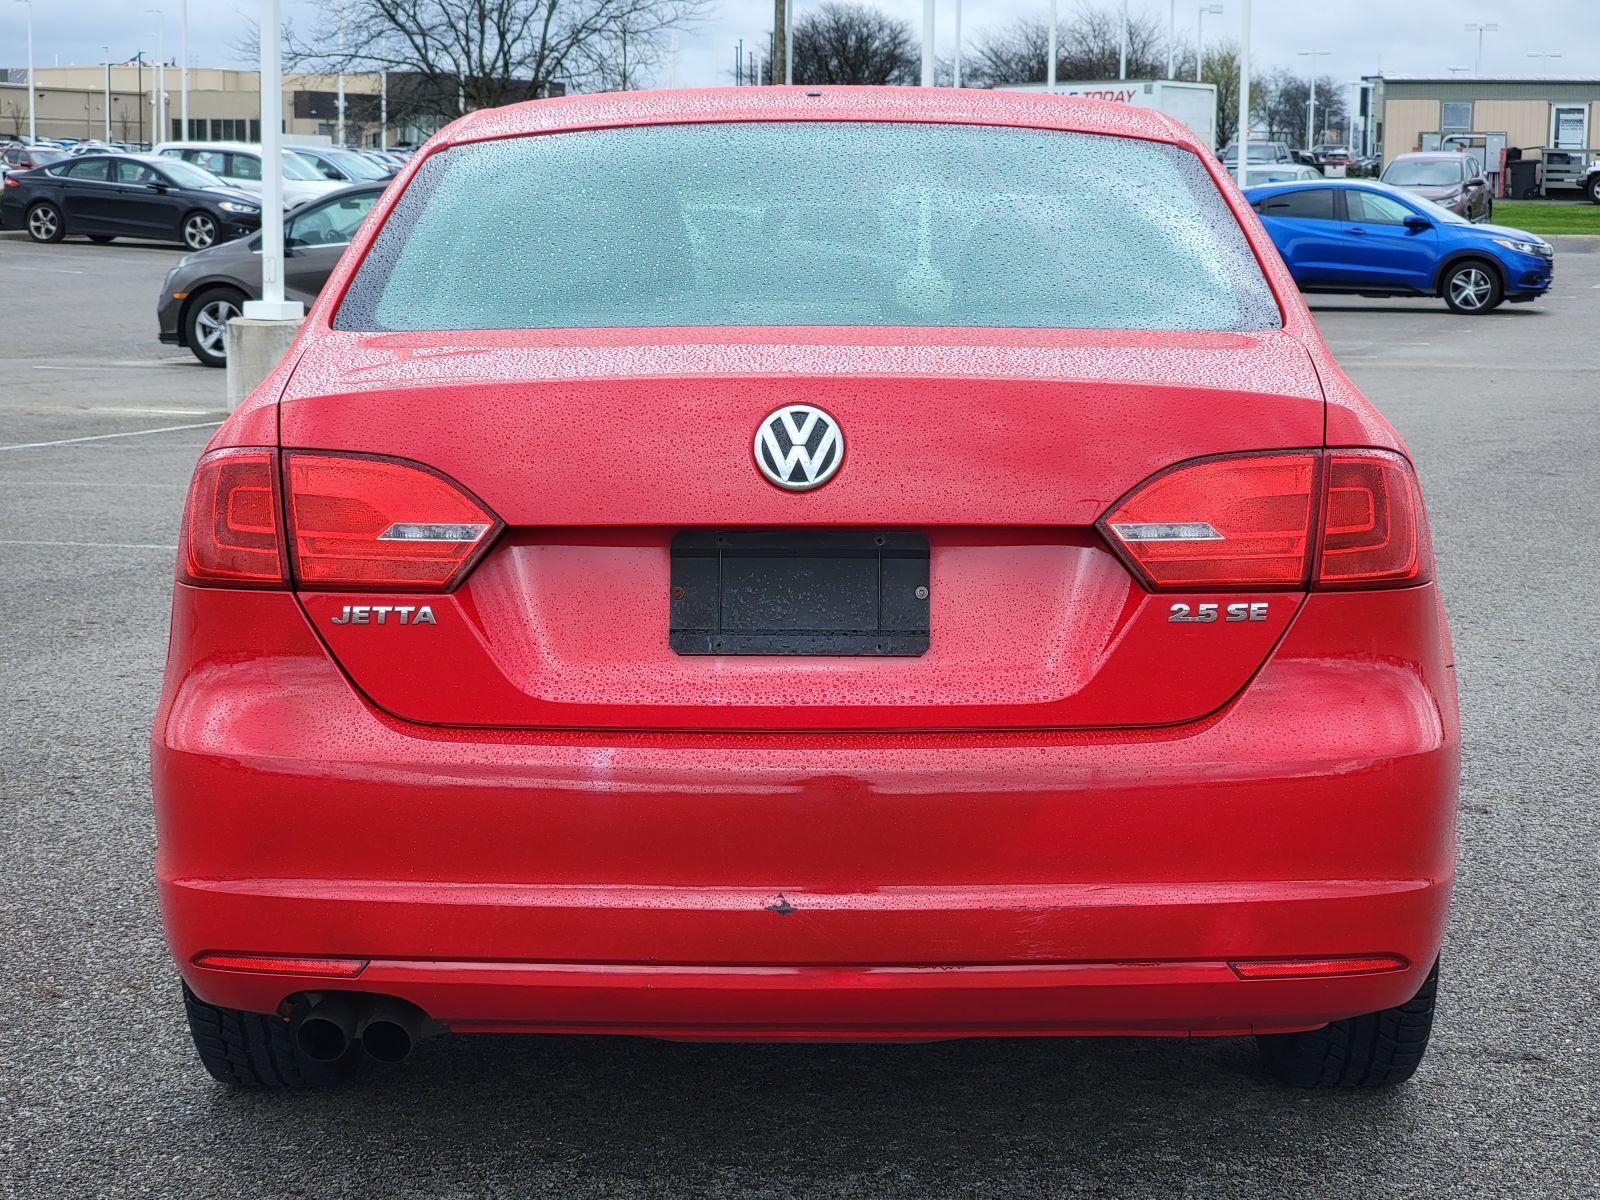 Used, 2012 Volkswagen Jetta 2.5L SE, Red, G0251A-11